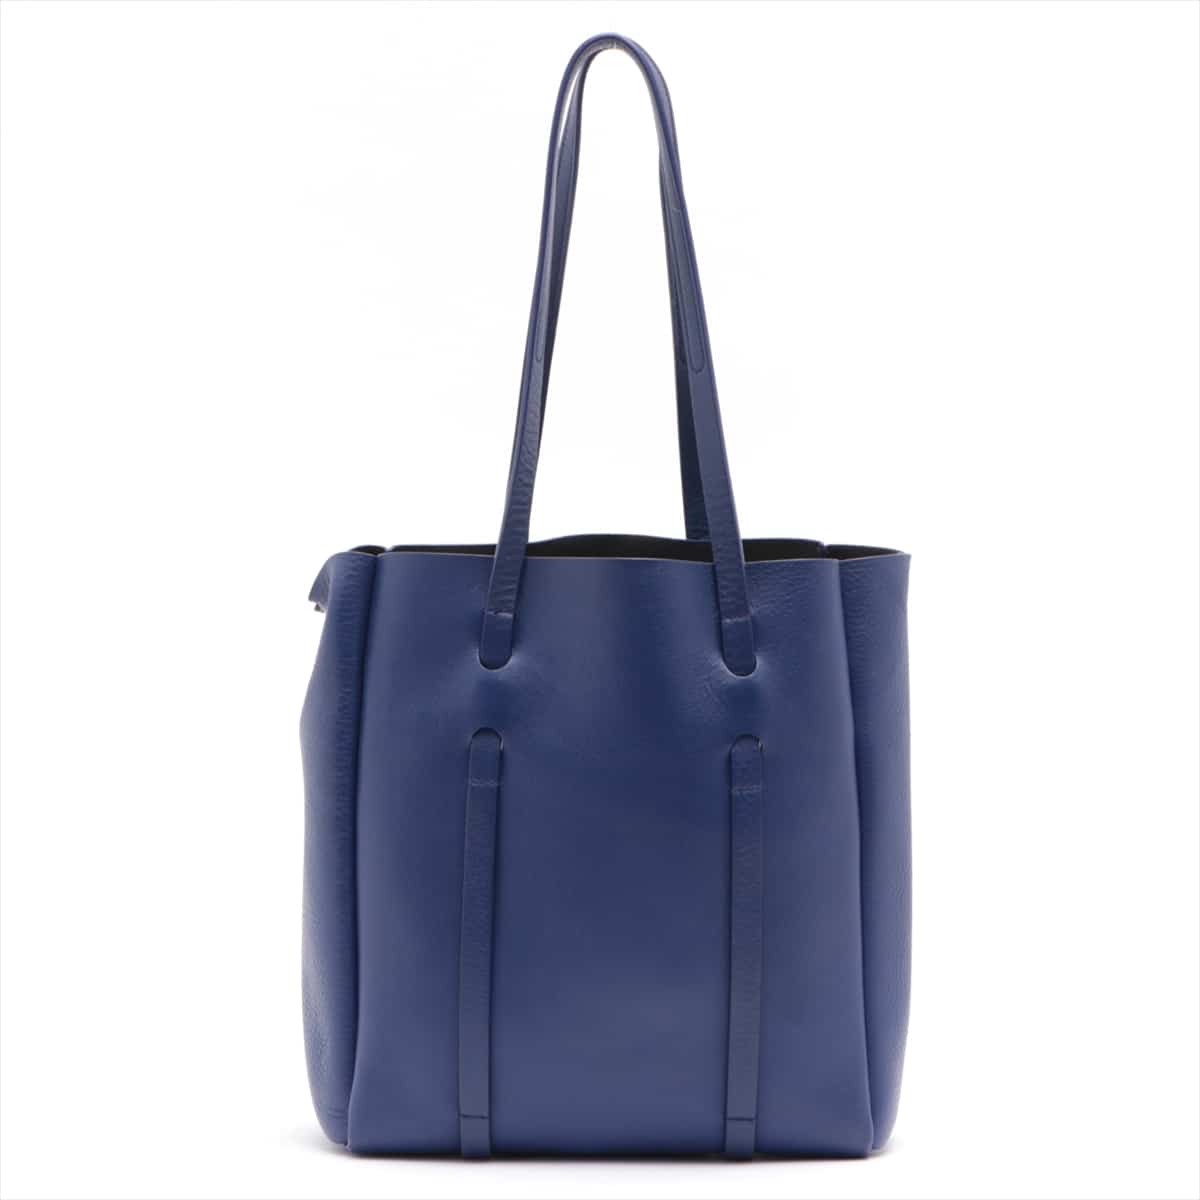 Balenciaga Everyday Tote XS Leather Tote bag Blue 489813 with pouch